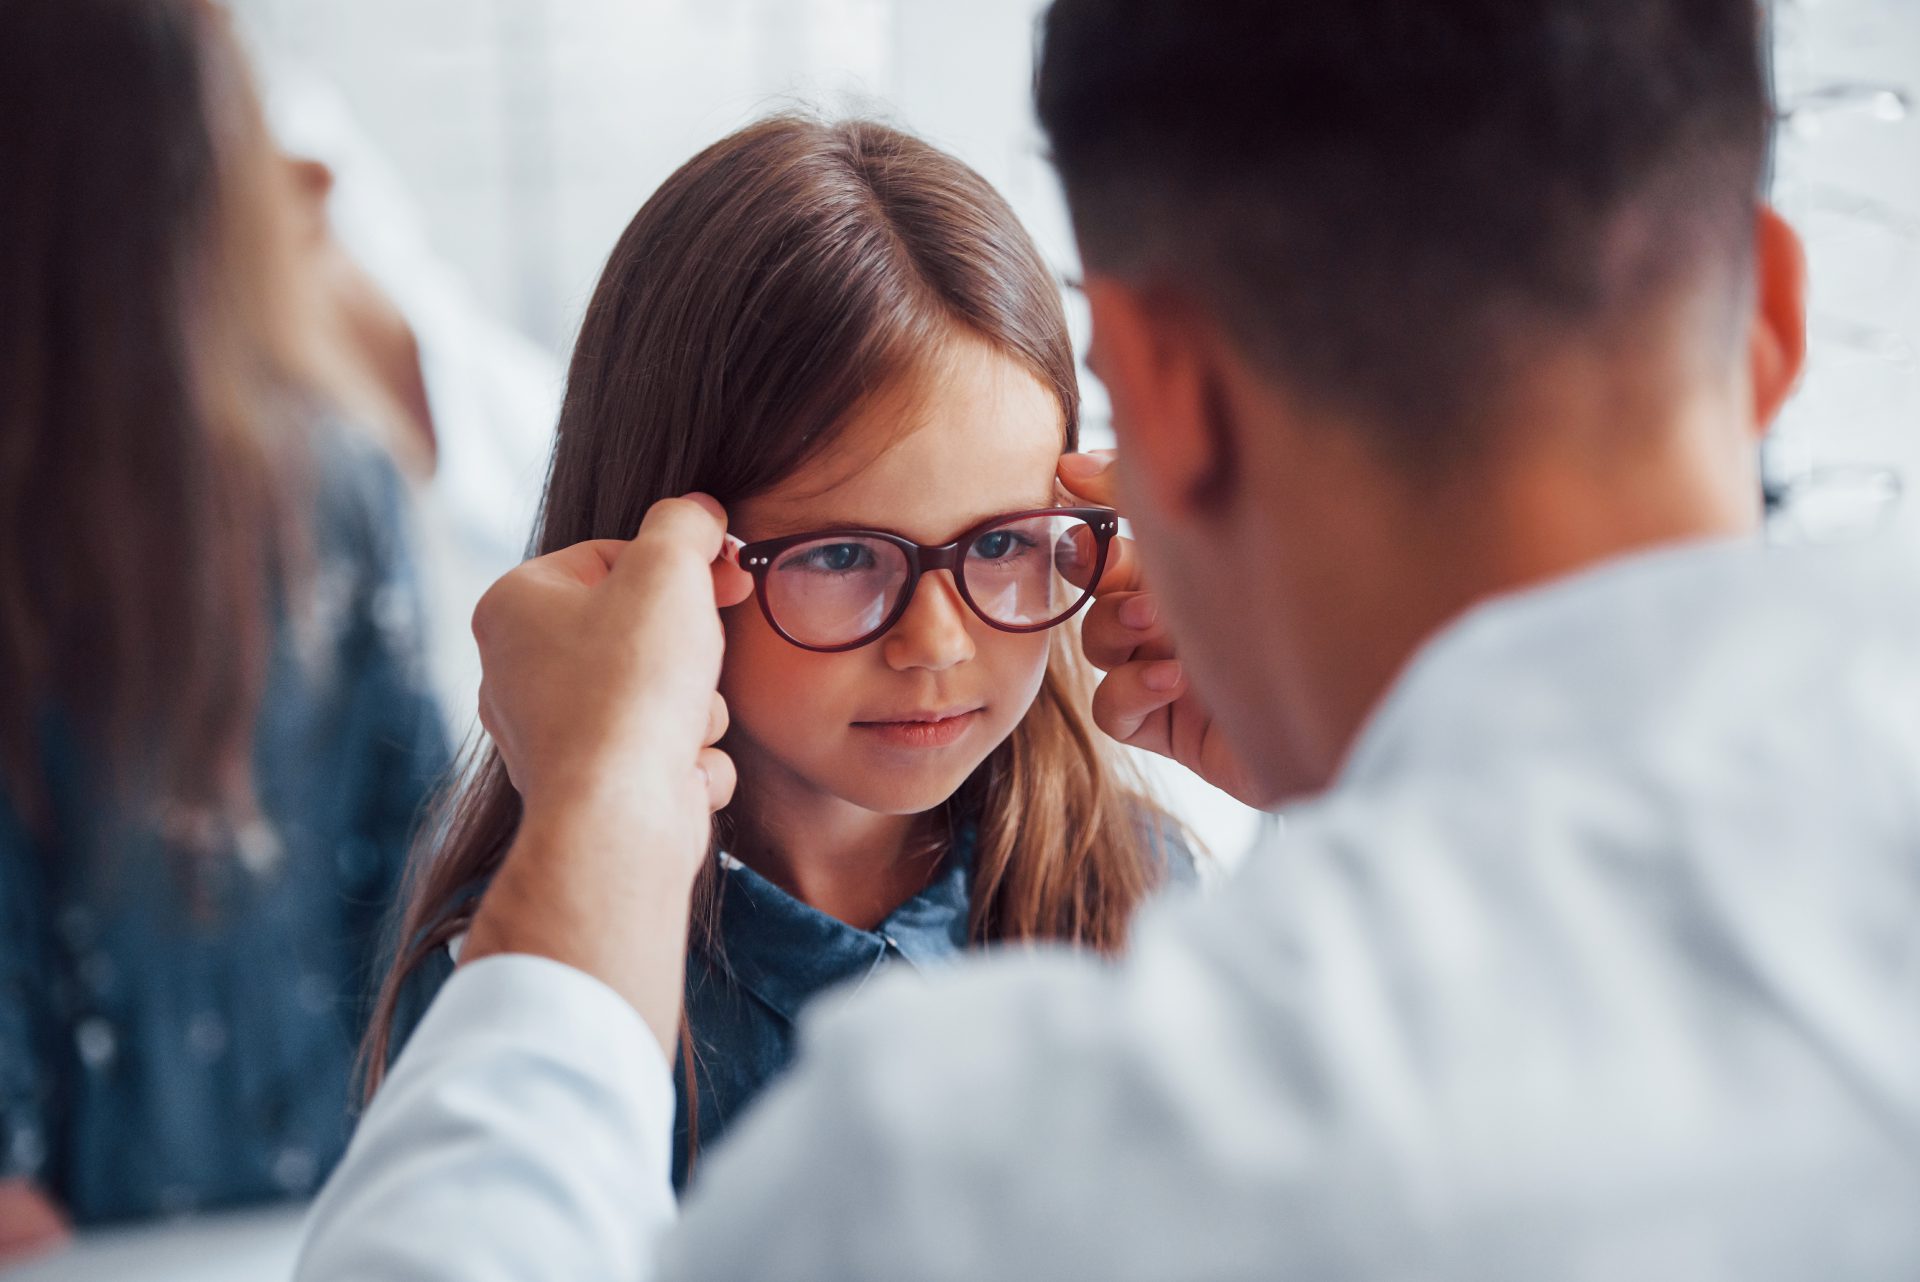 A child trying on some glasses